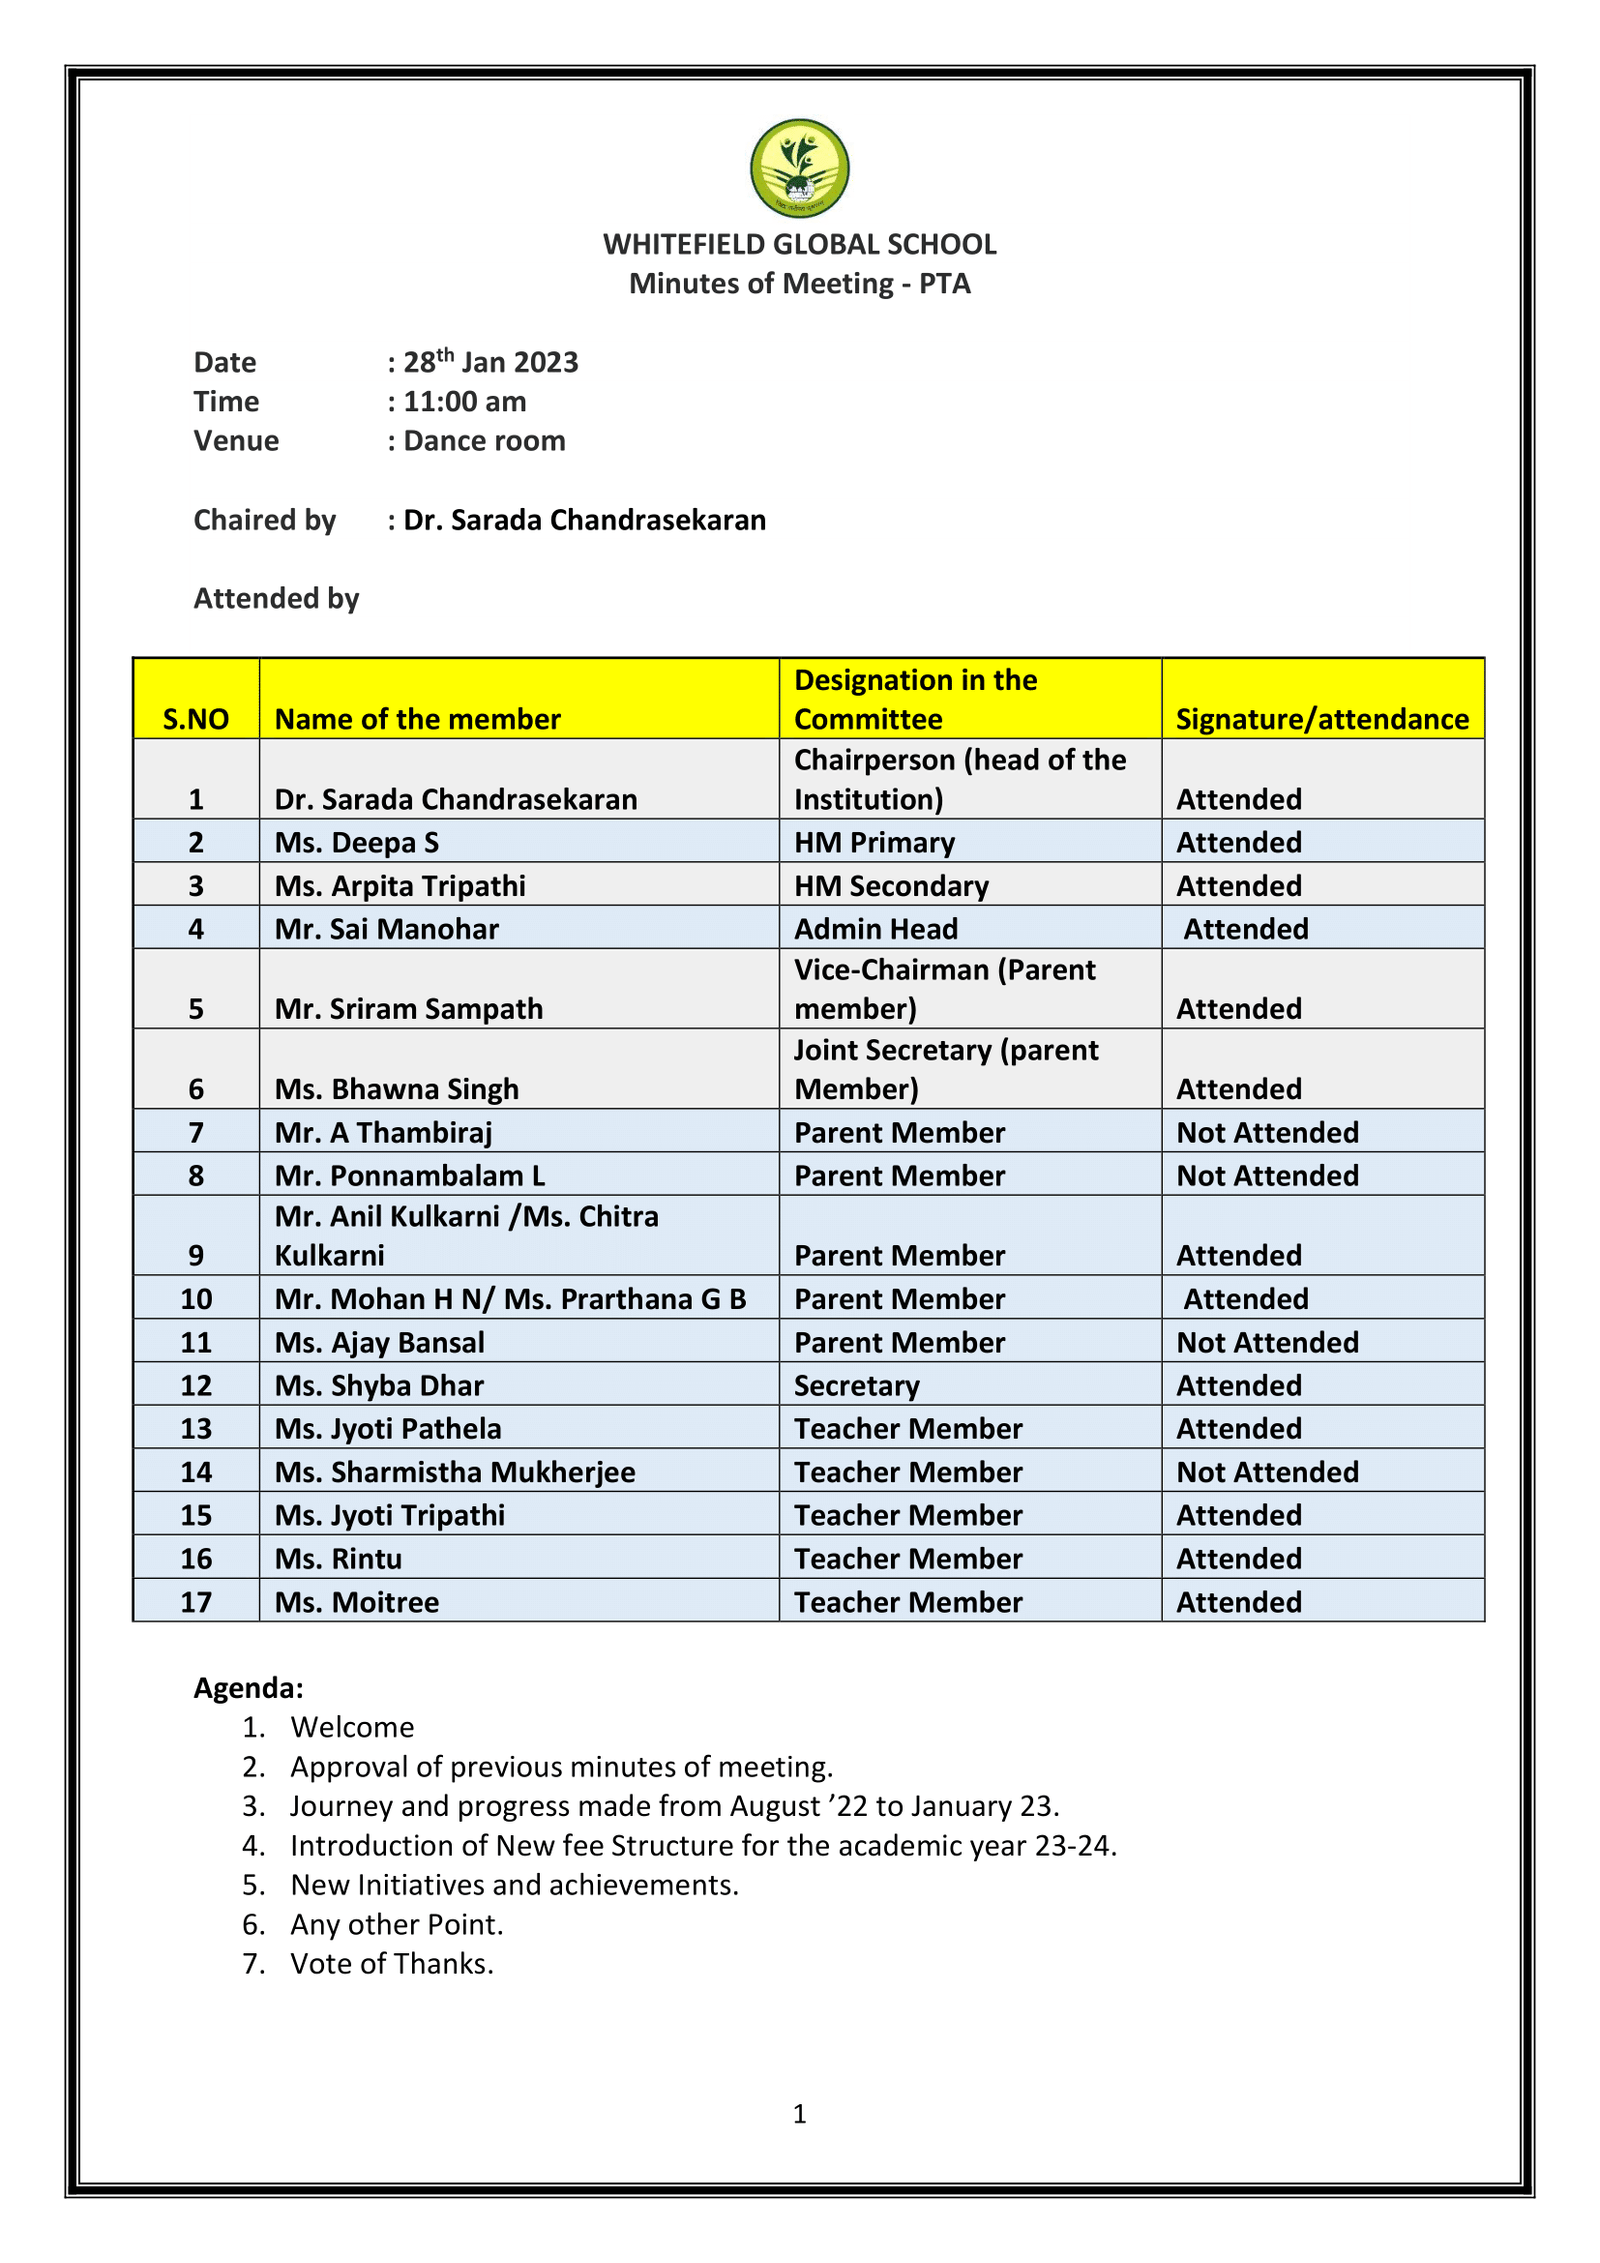 Minutes of Meeting -PTA 28th Jan Updated-1